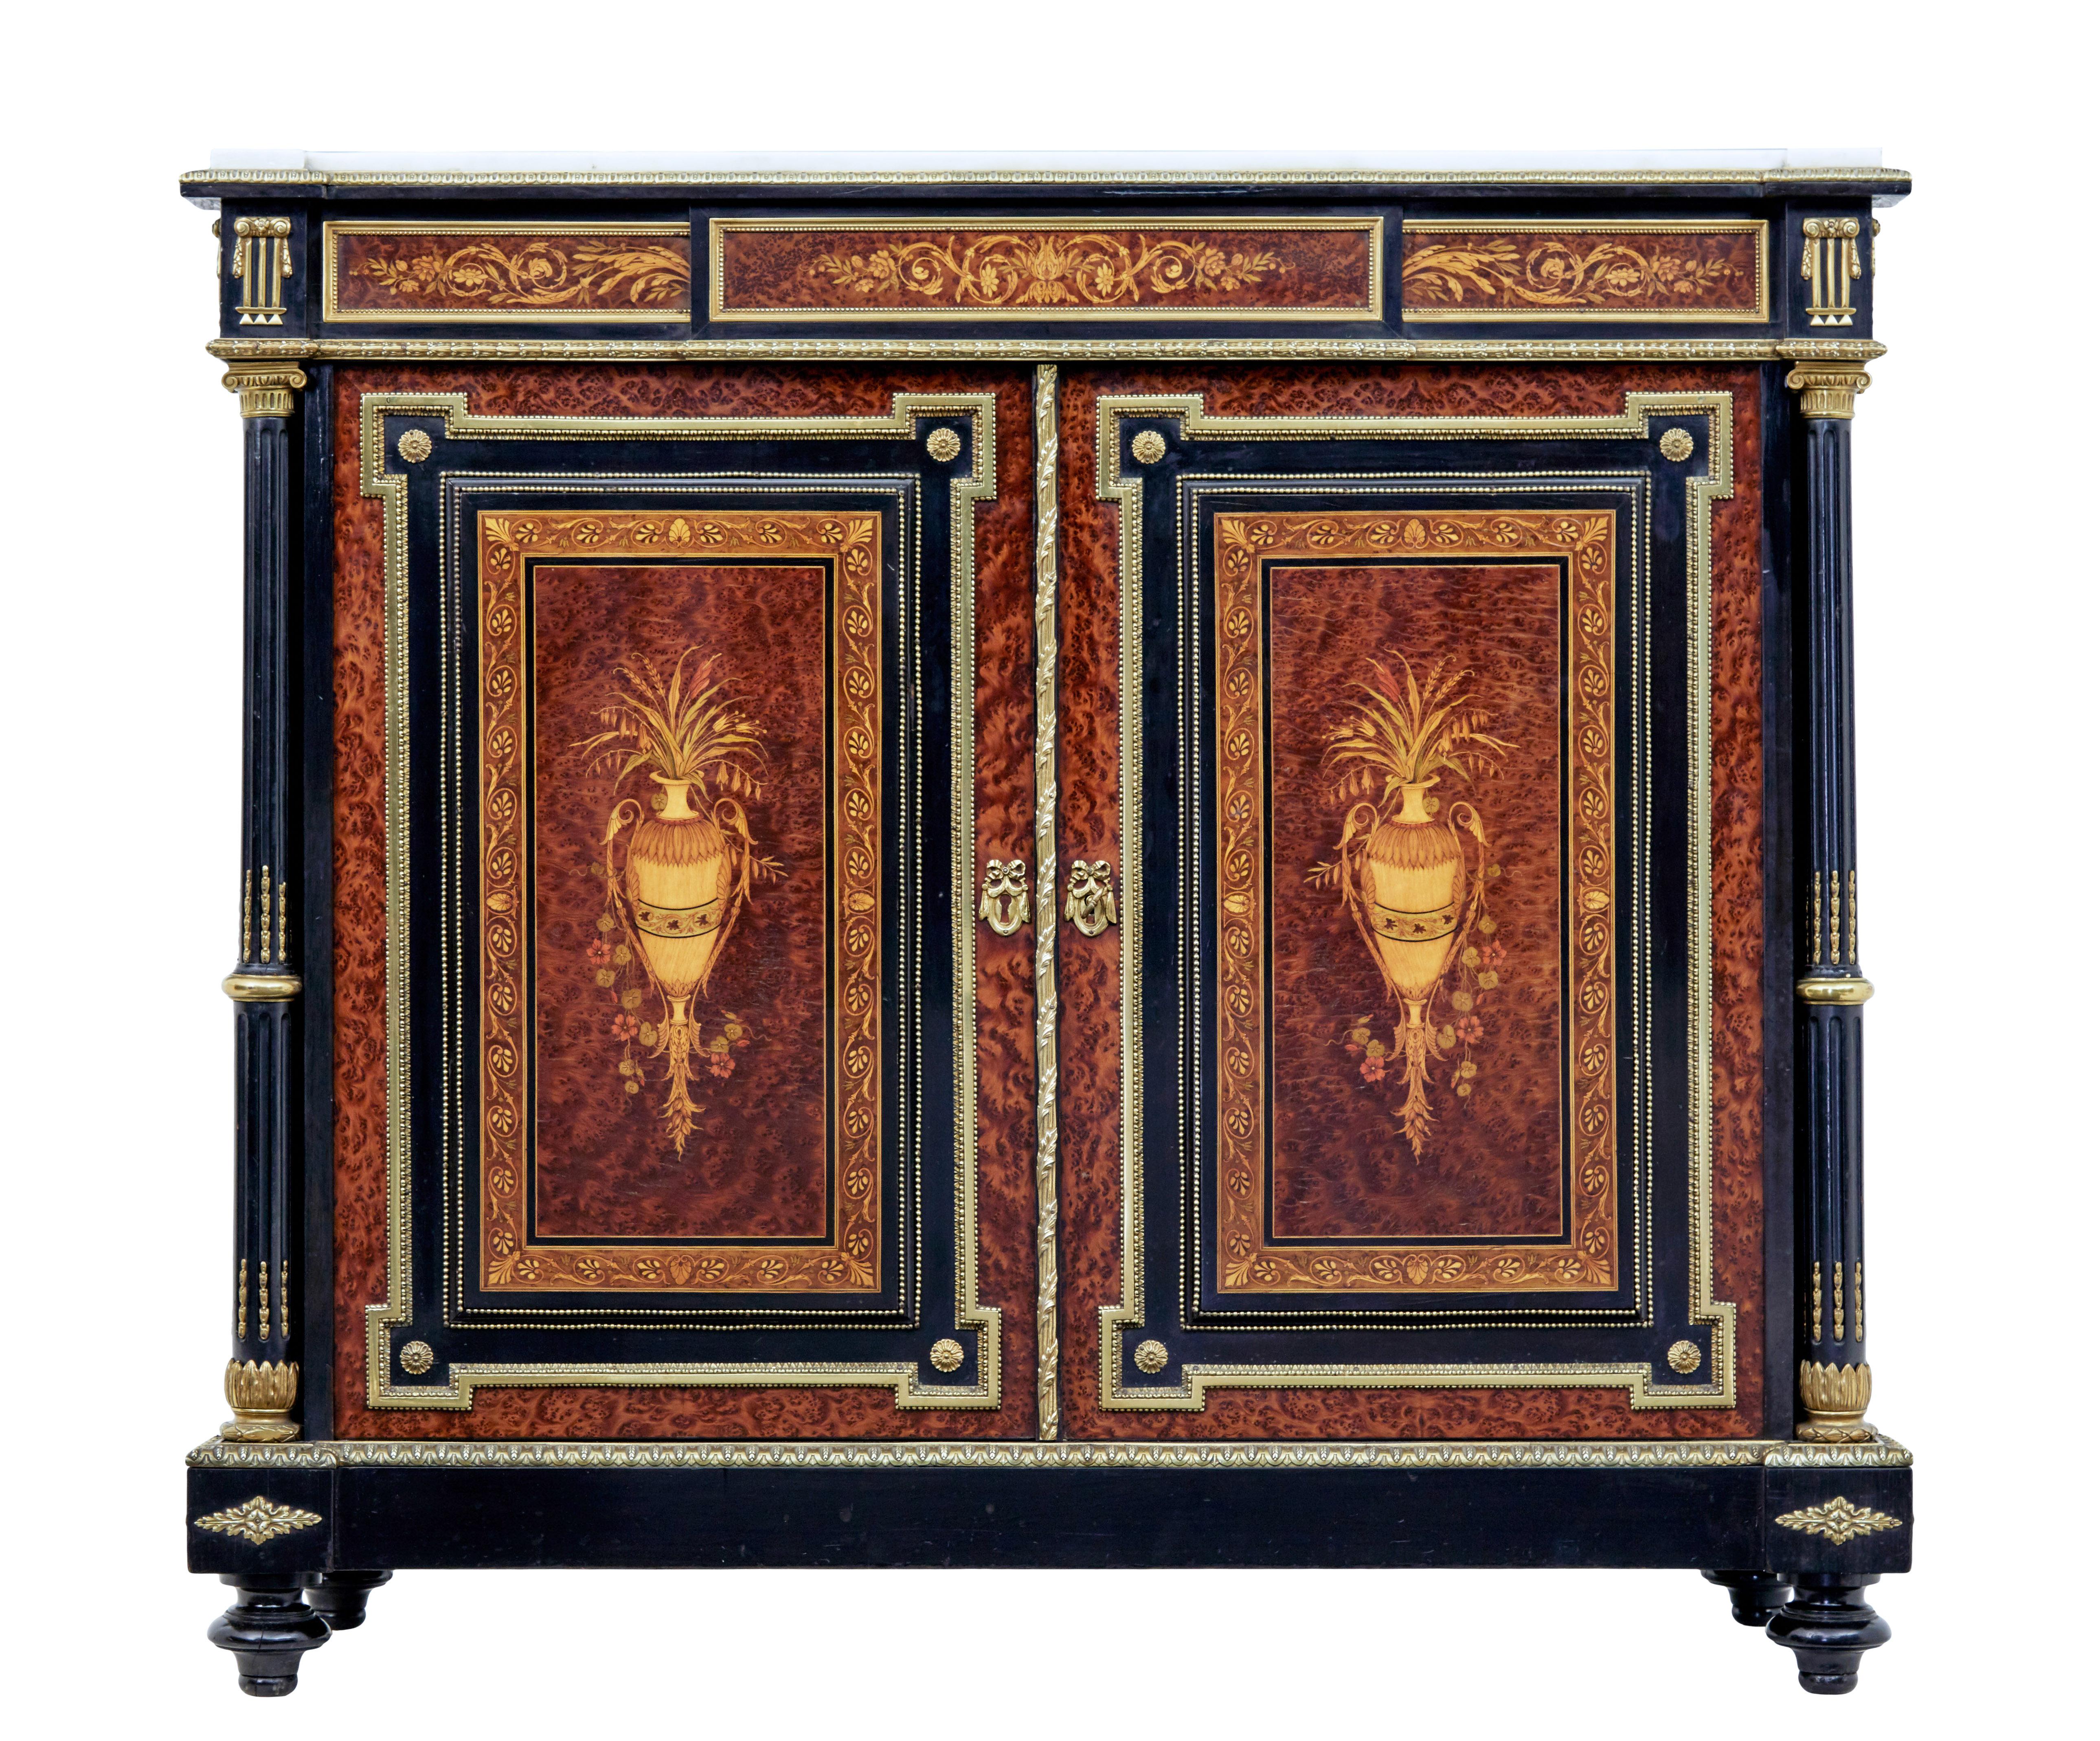 19th century French marble top amboyna sideboard circa 1870.

Fine quality ebonised sideboard with amboyna panels and brass decoration.

Shaped with marble top with feint grey veining boxed in on the top surface by a thick brass edging. Dummy